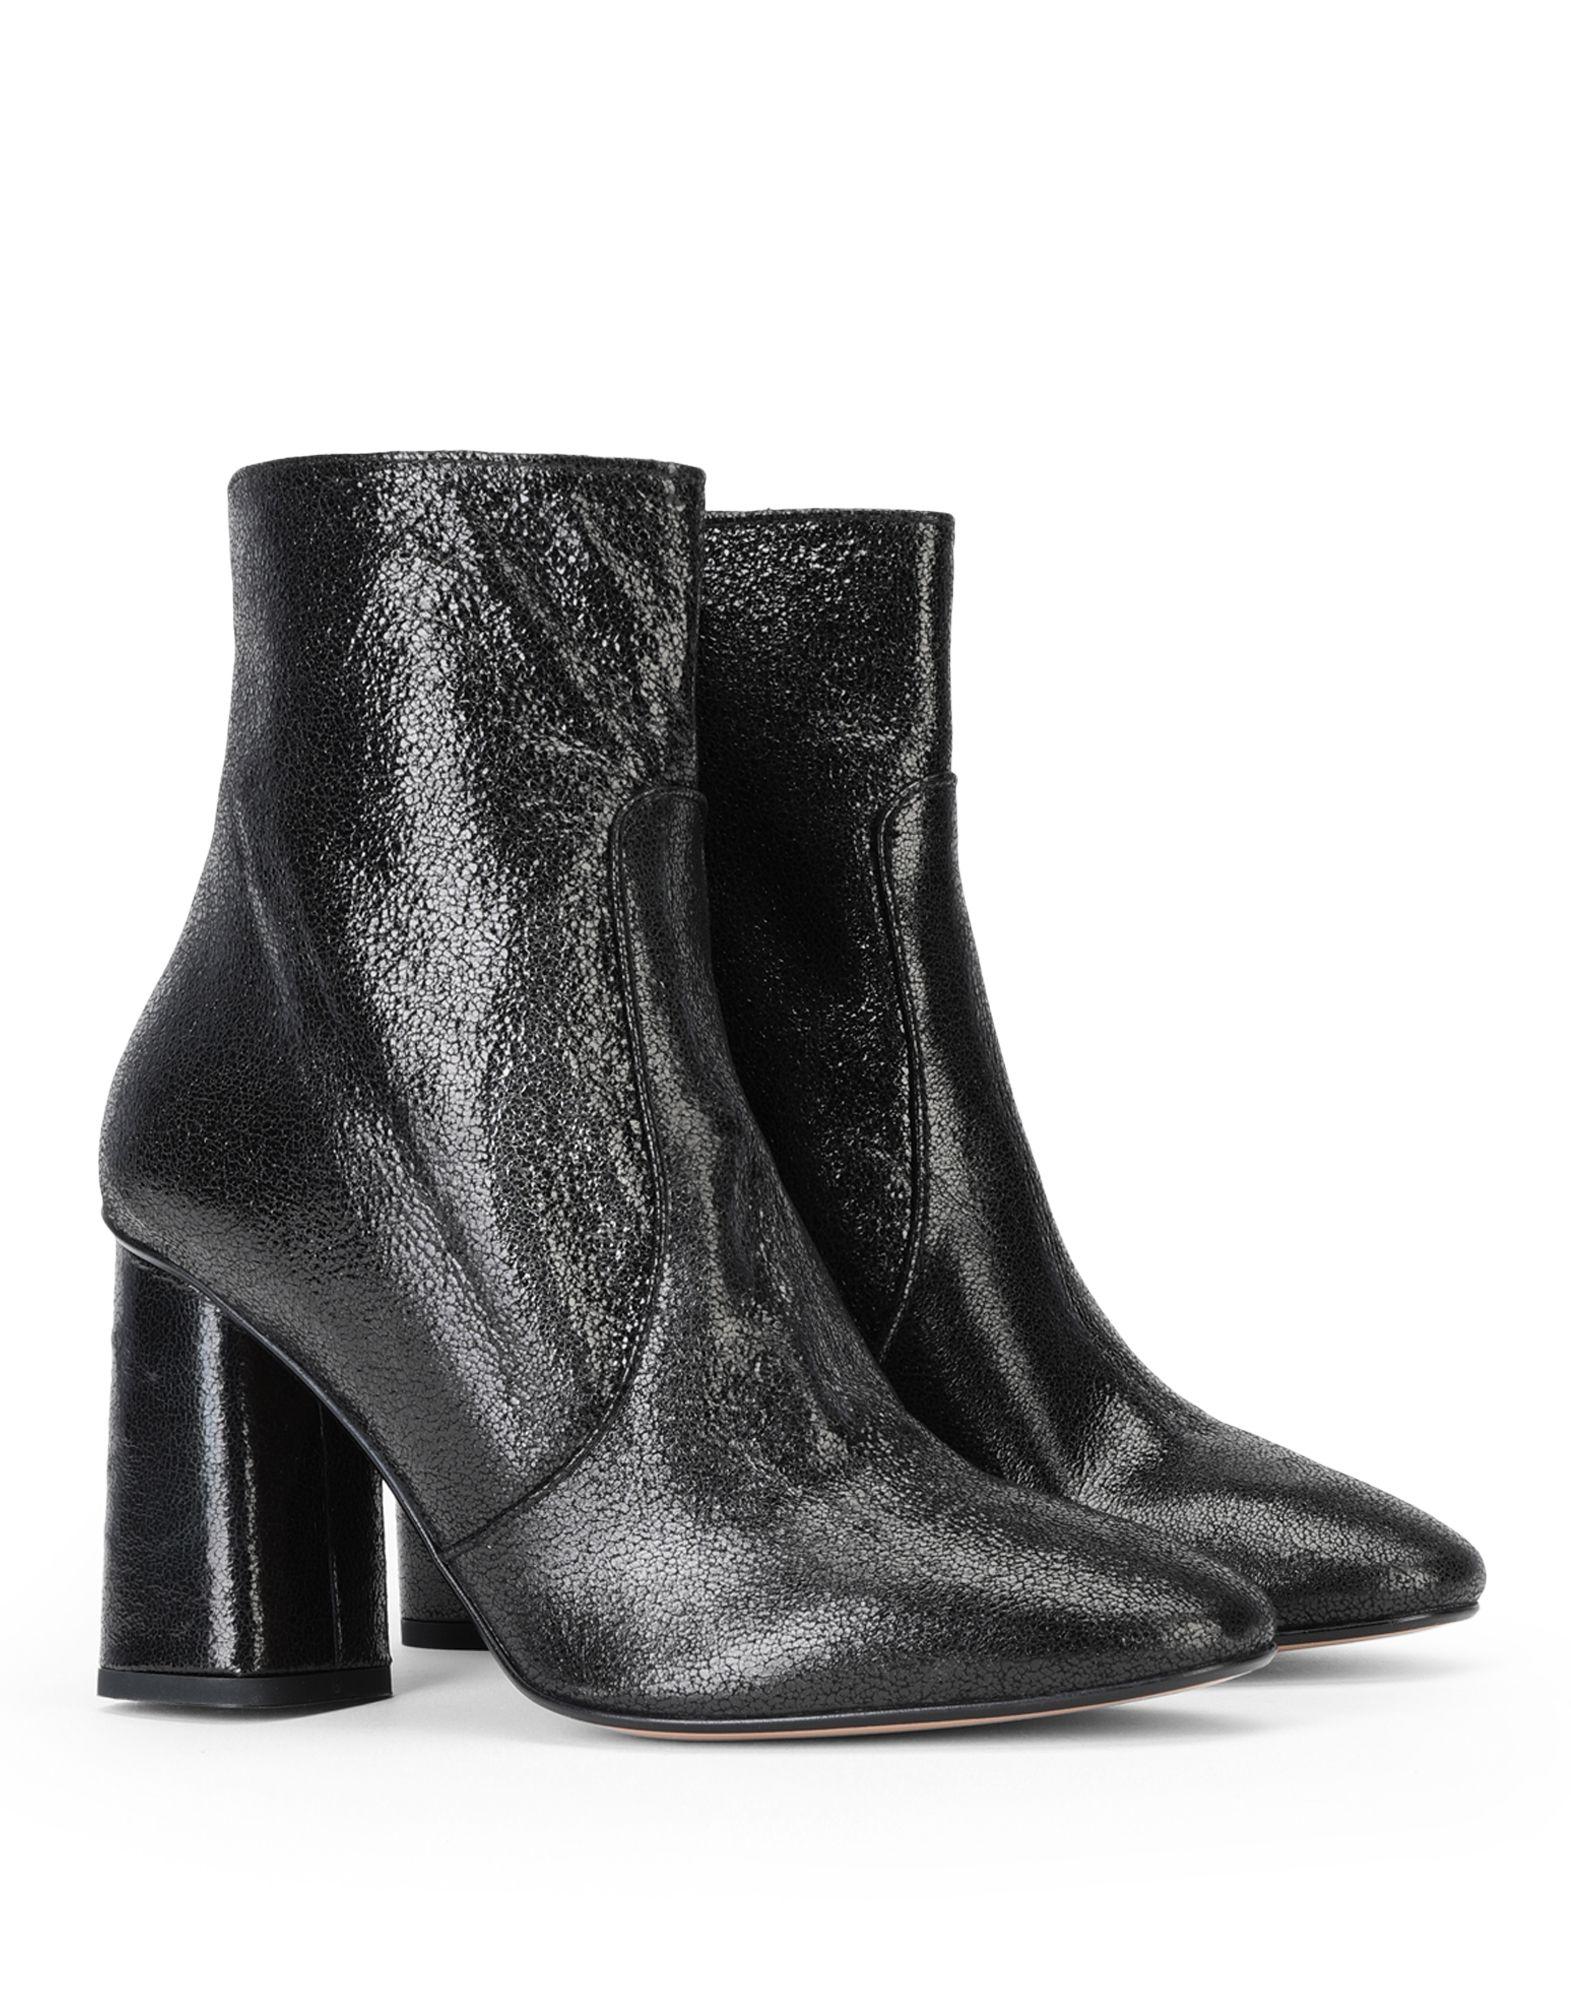 8 by YOOX Ankle Boots in Black - Lyst